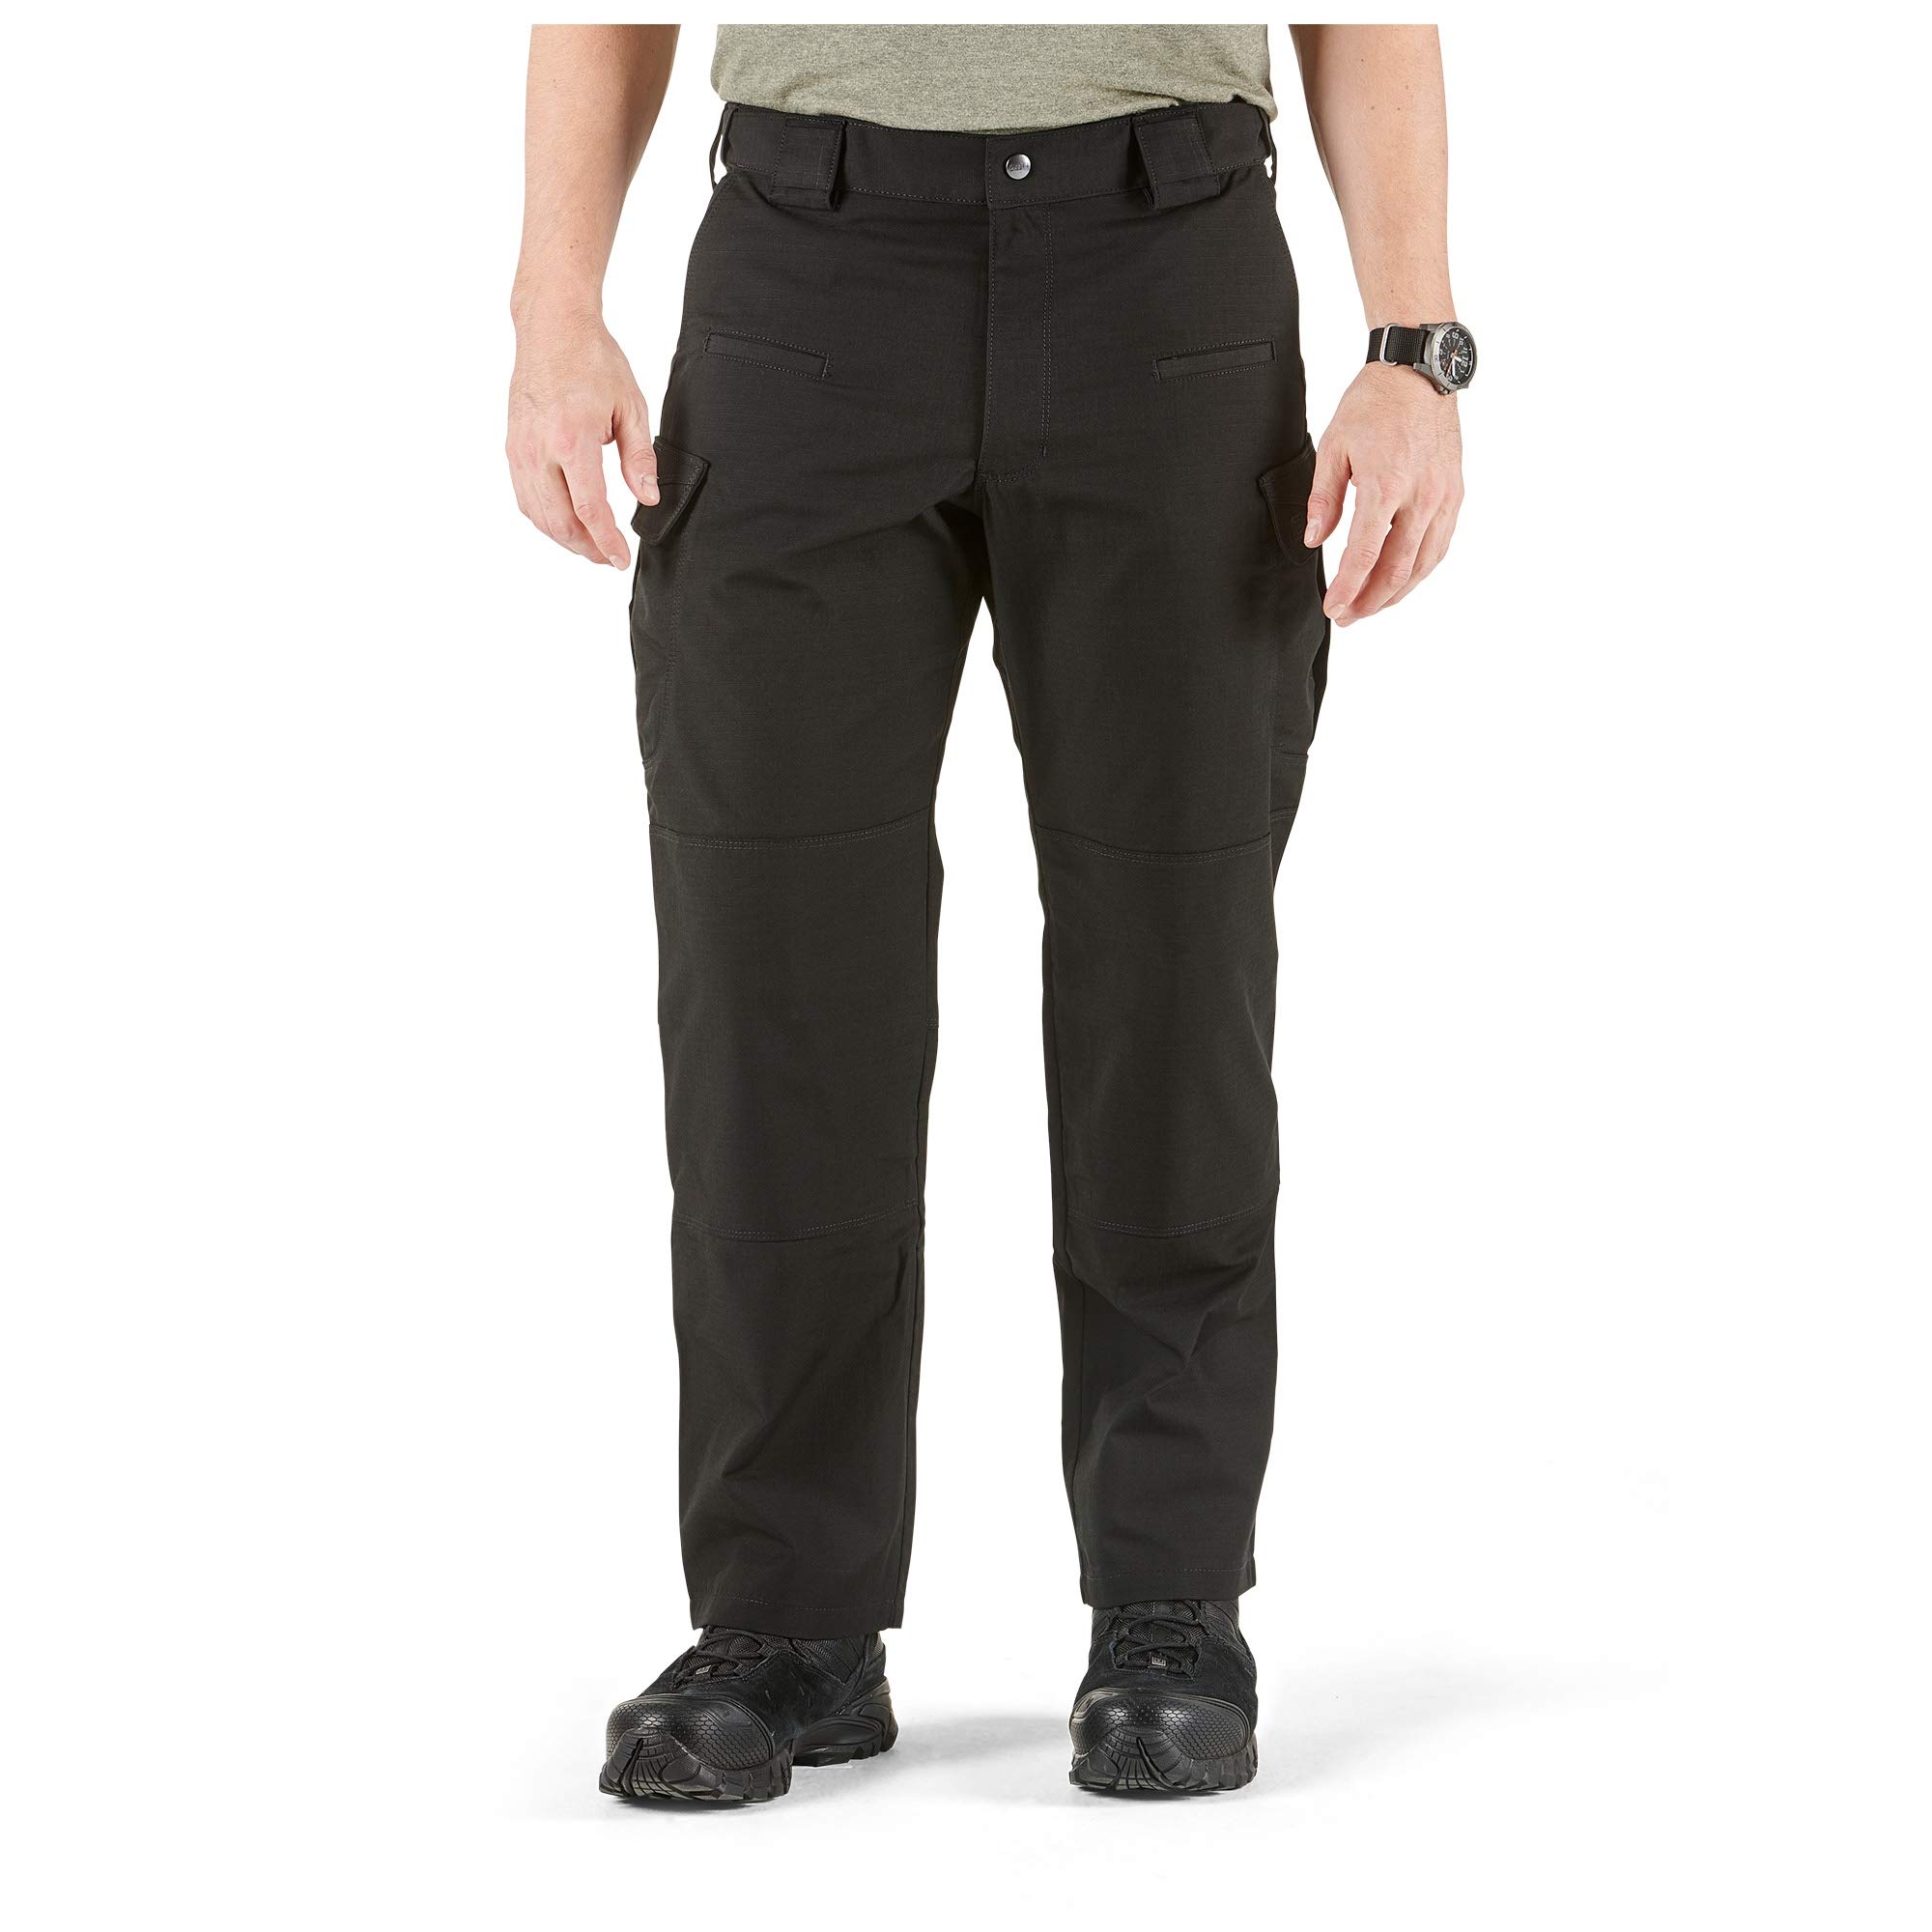 M-Tac - Tactical Pants Conquistador Gen. I Flex - Ripstop - Coyote -  20059017 best price | check availability, buy online with | fast shipping